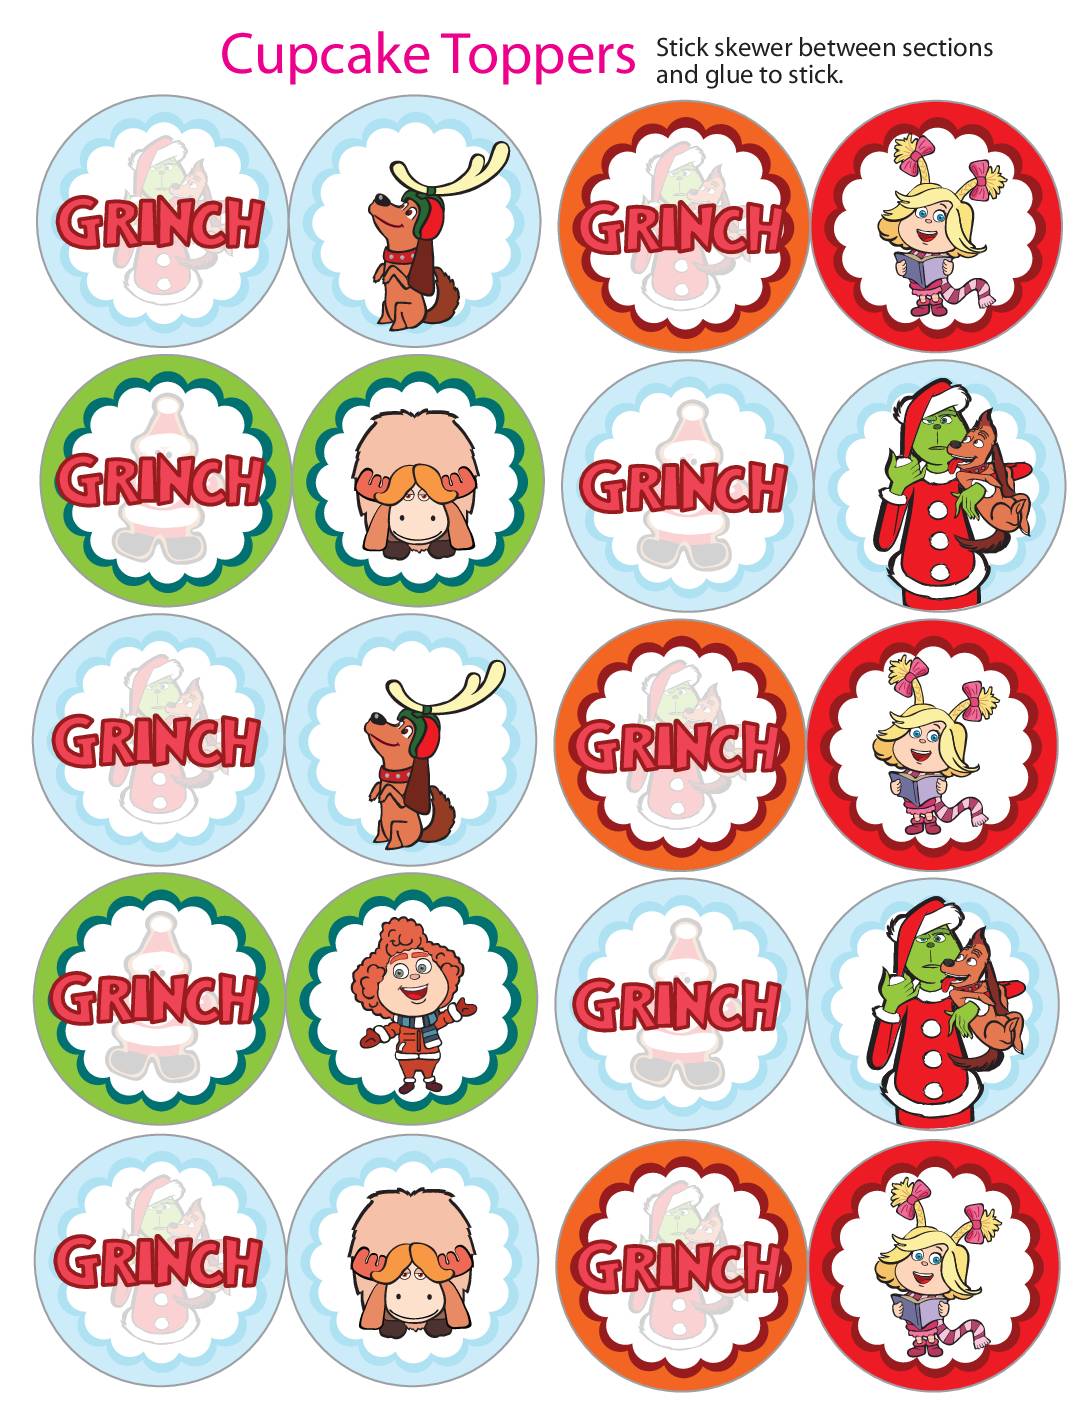 Cupcake Toppers Grinch